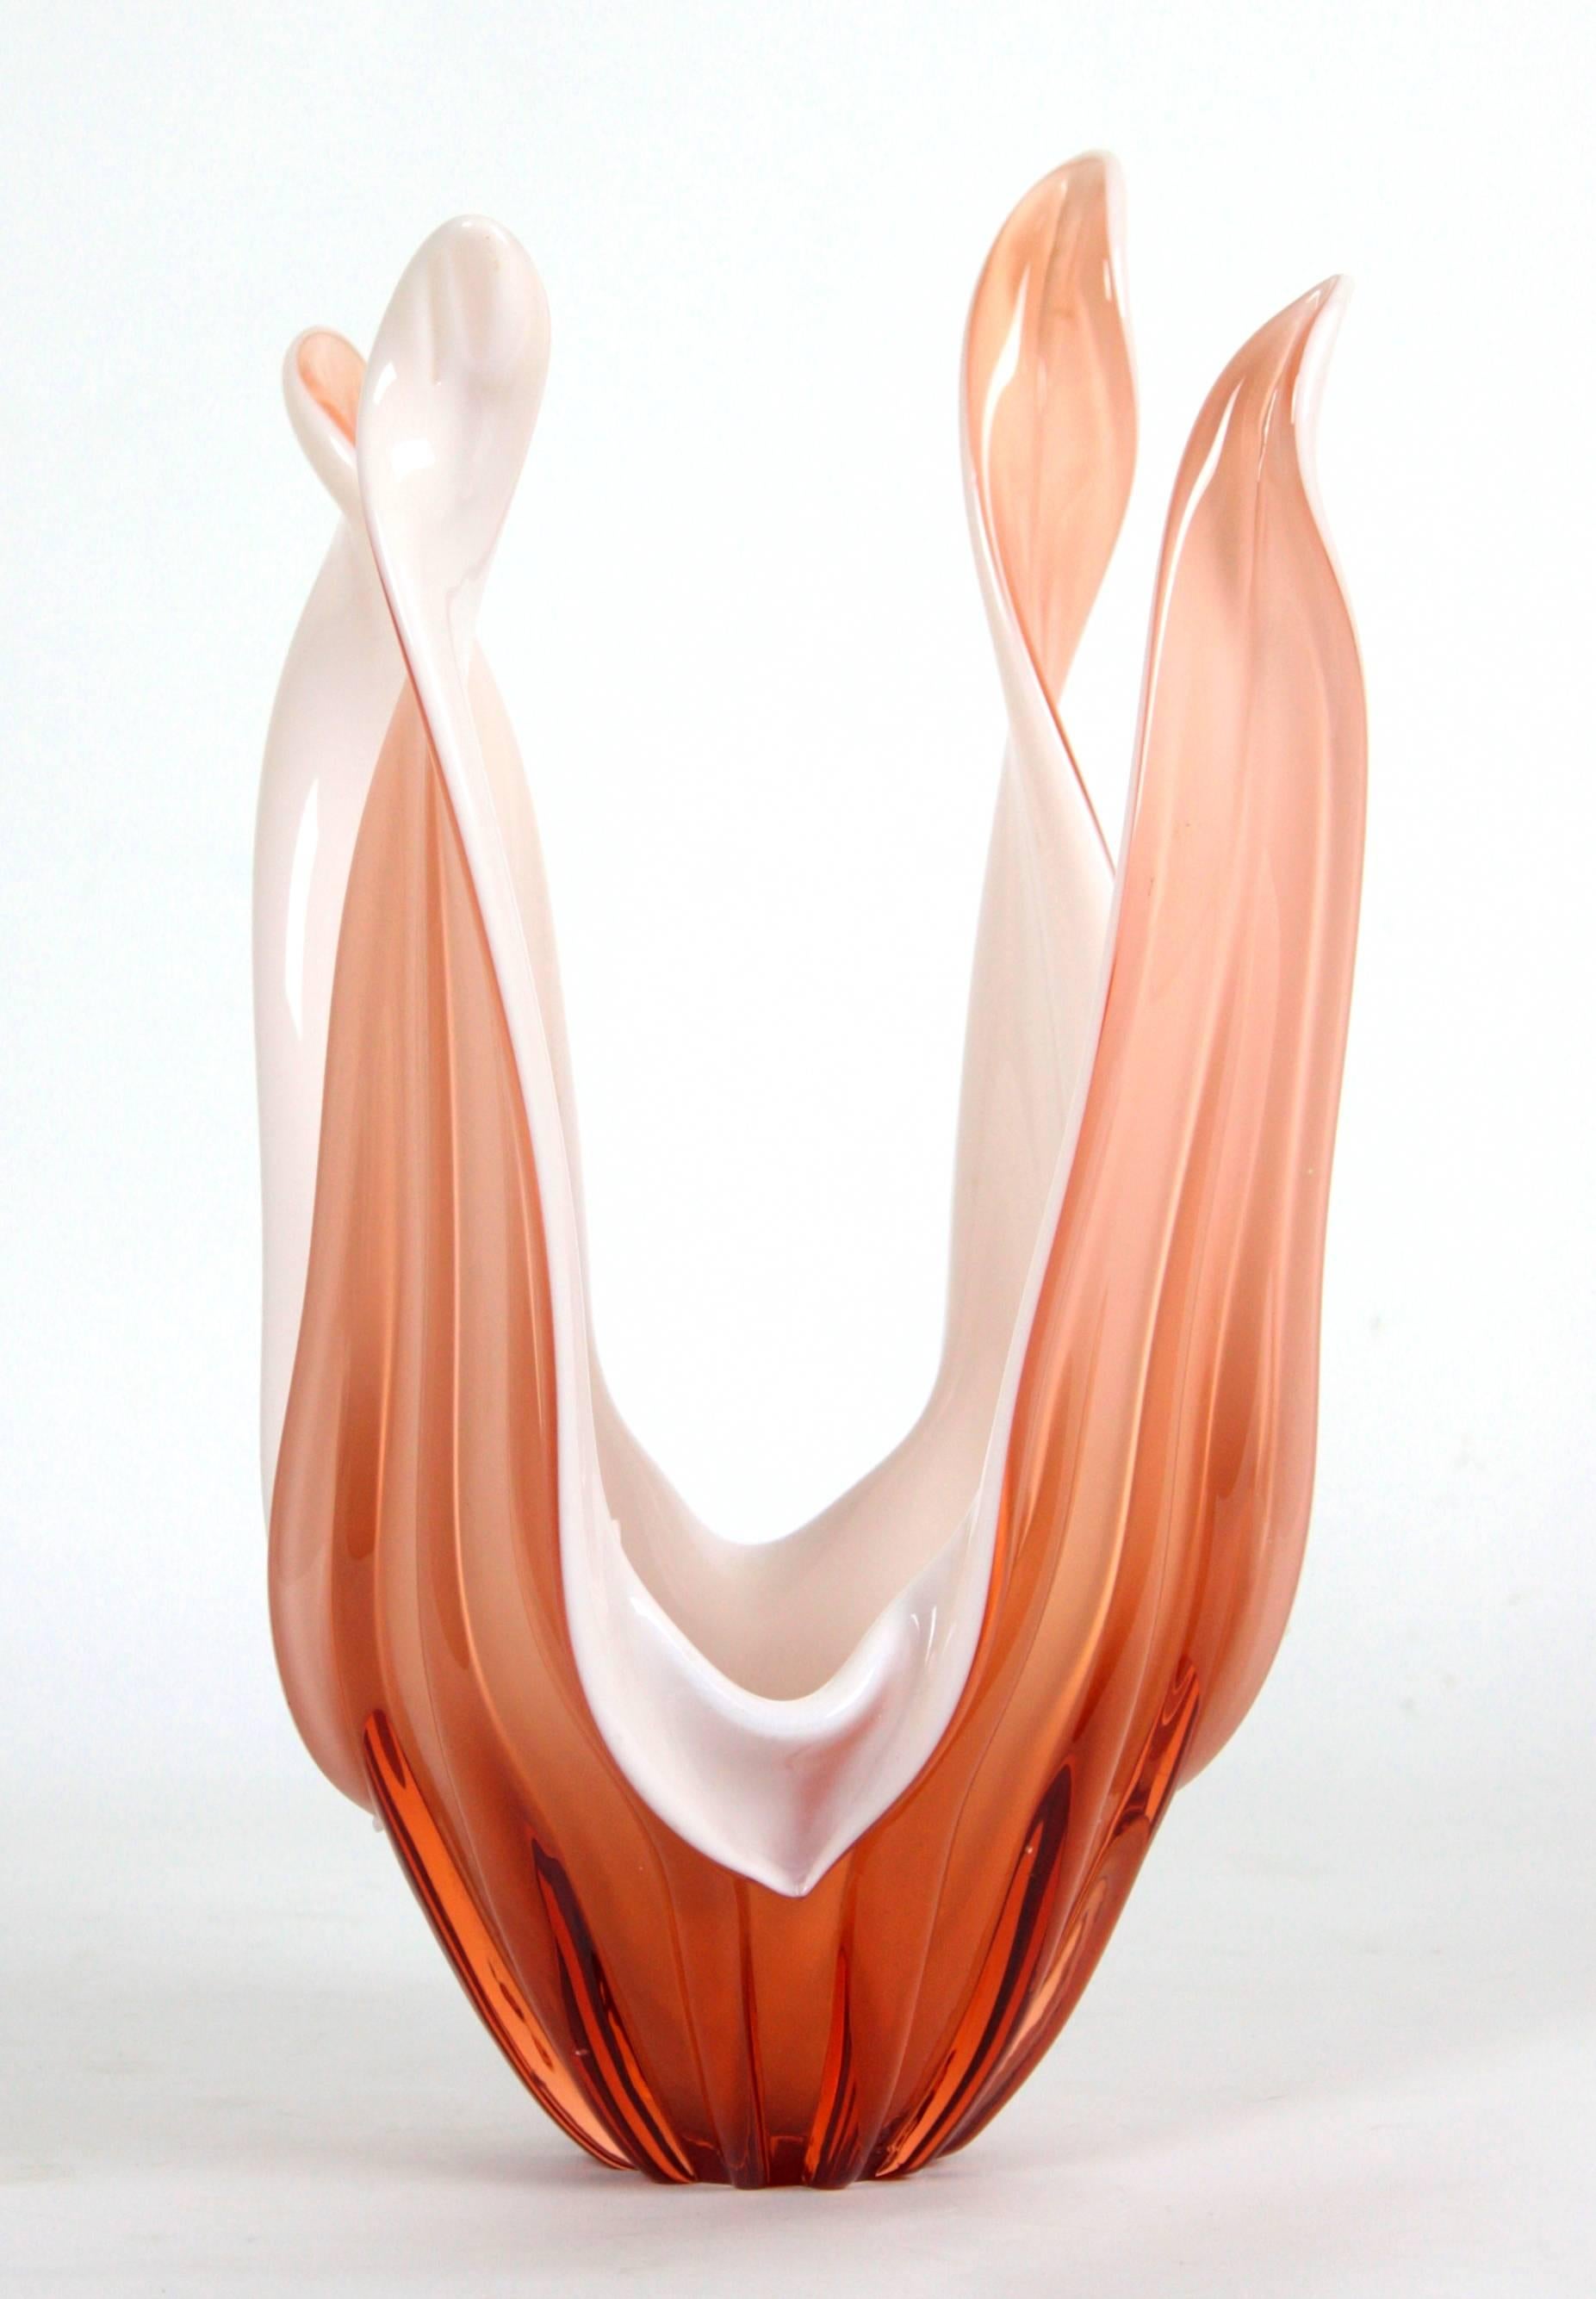 Mid-Century Modern Murano Centerpiece Vase in Peach and Opal White Glass, 1960s For Sale